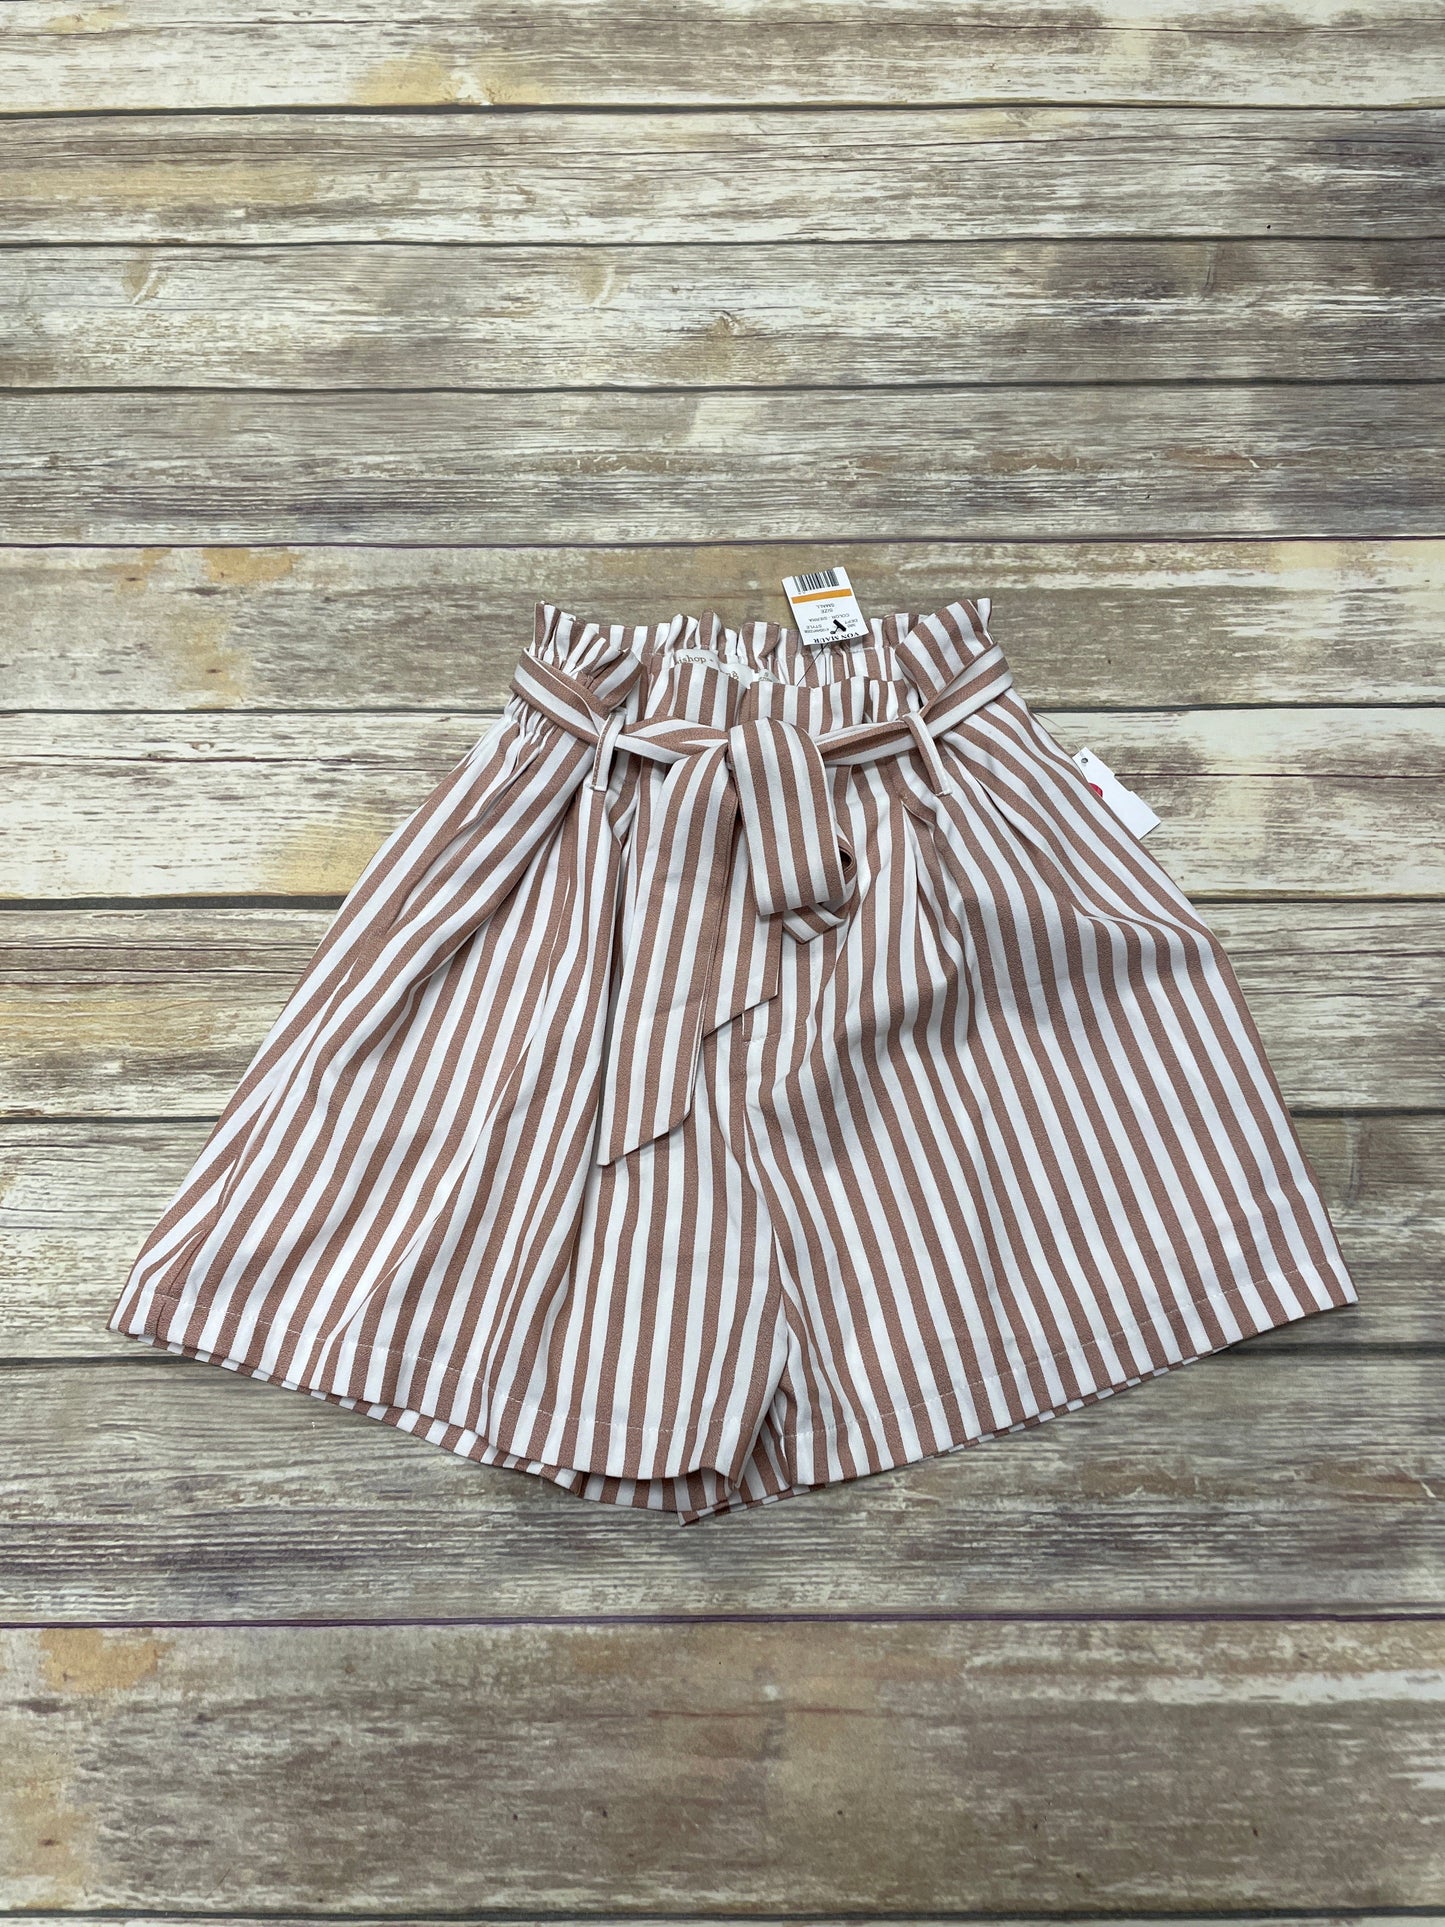 Striped Pattern Shorts Bishop + Young, Size S